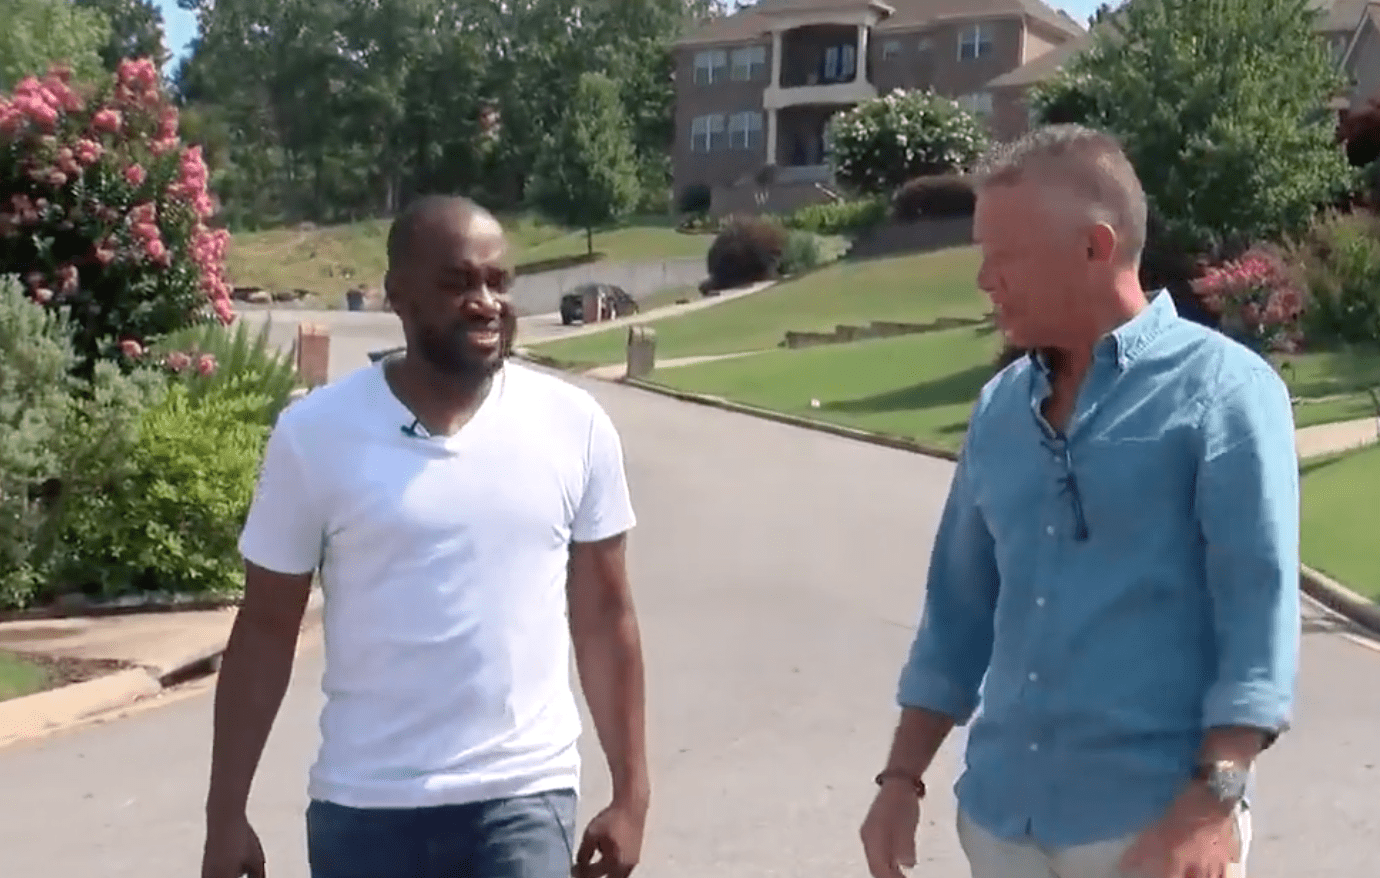 Neighbor details where he found a man lying on the ground before he started with chest compressions | Photo: Youtube/FOX 16 KLRT